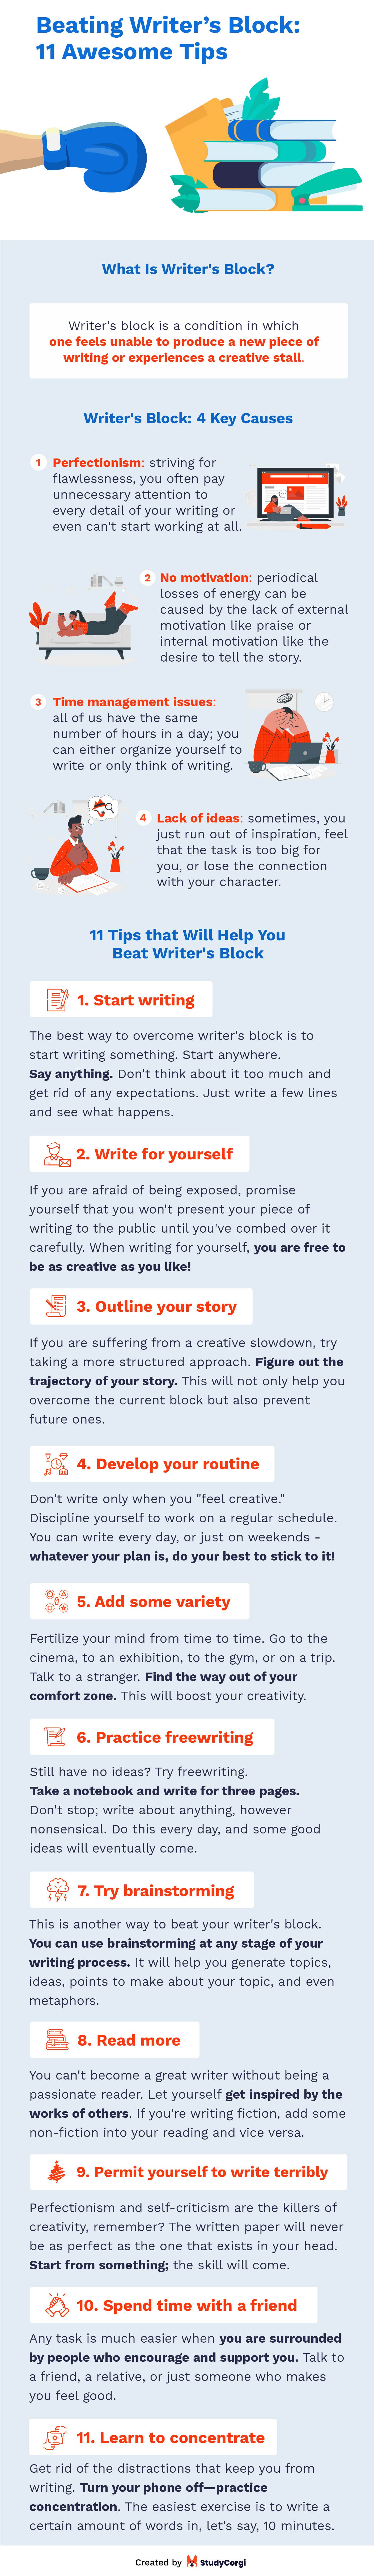 Beating Writer’s Block: 11 Awesome Tips